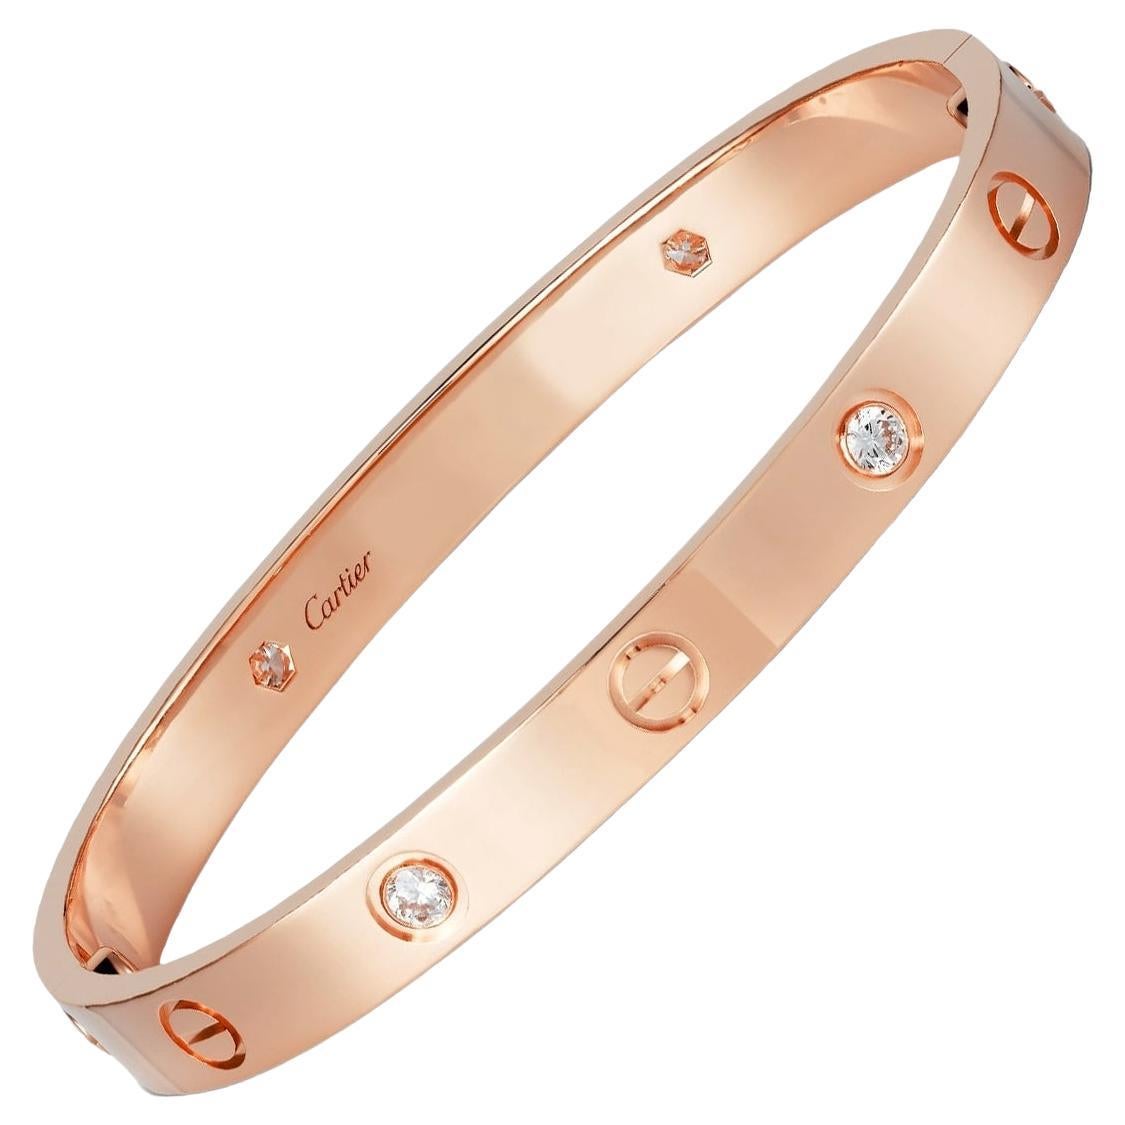 Cartier Nail Bracelets Best Price In Pakistan | Rs 2300 | find the best  quality of Jewelry,jewellery , Bracelets, Rings, Neck Less, Earrings,  Hairpin, Hand Cuff, Pendant, Bangles at Wishlistpk.com